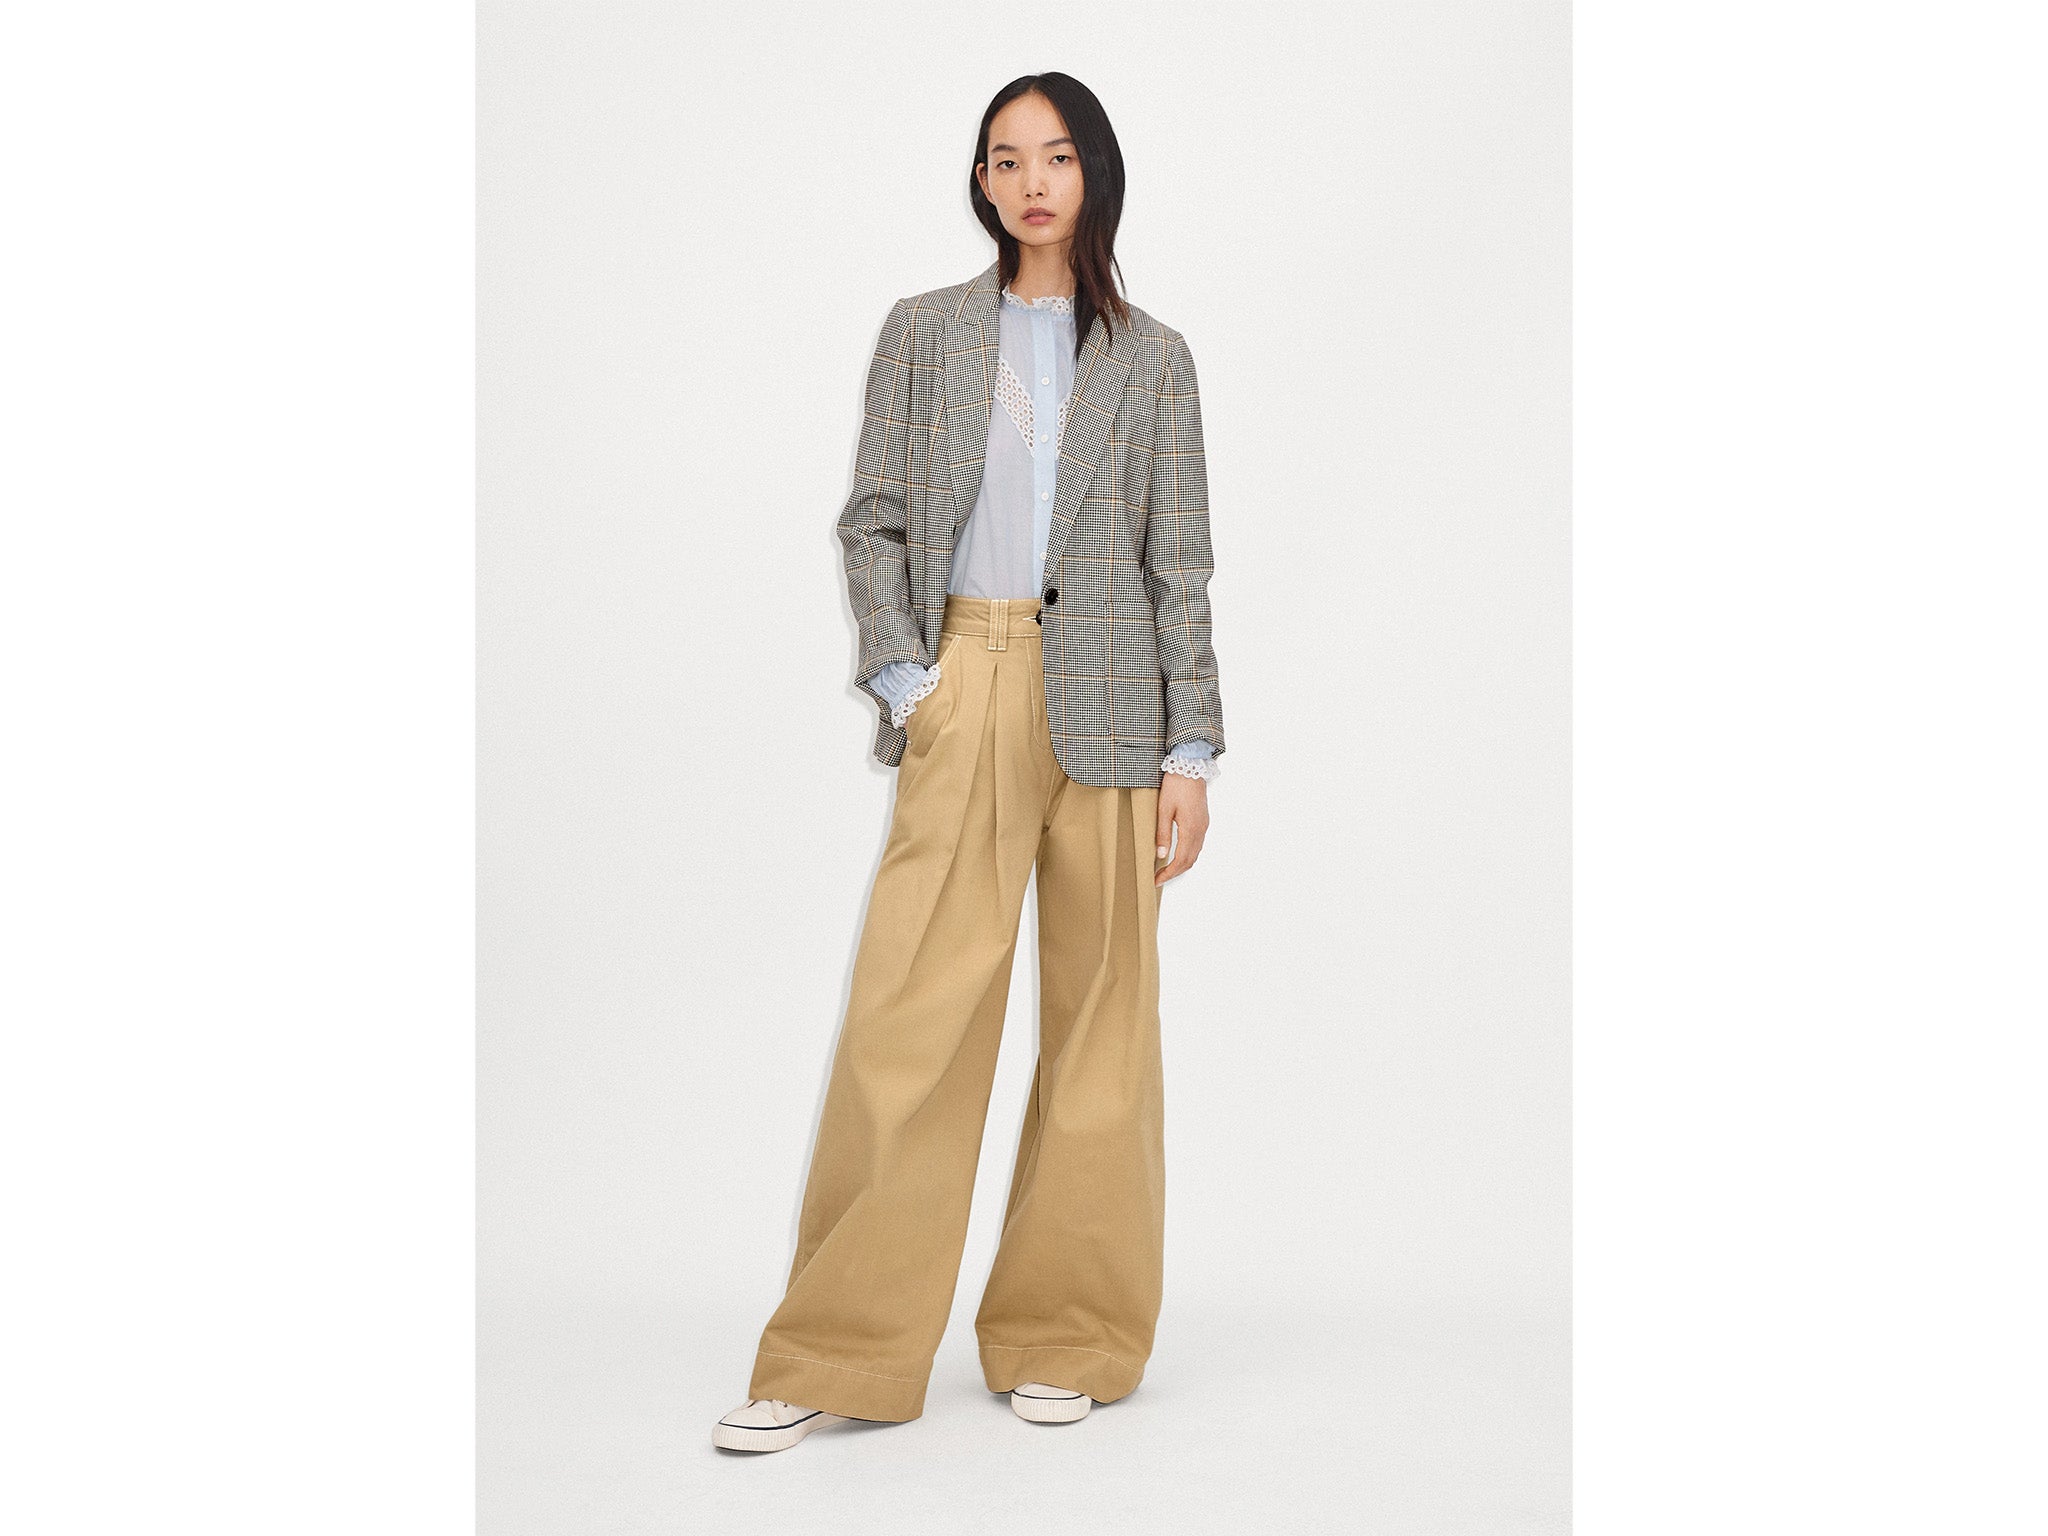 Extra Wide Pleat Front Trousers  Streets of Seoul  Mens Korean Style  Fashion  thestreetsofseoul